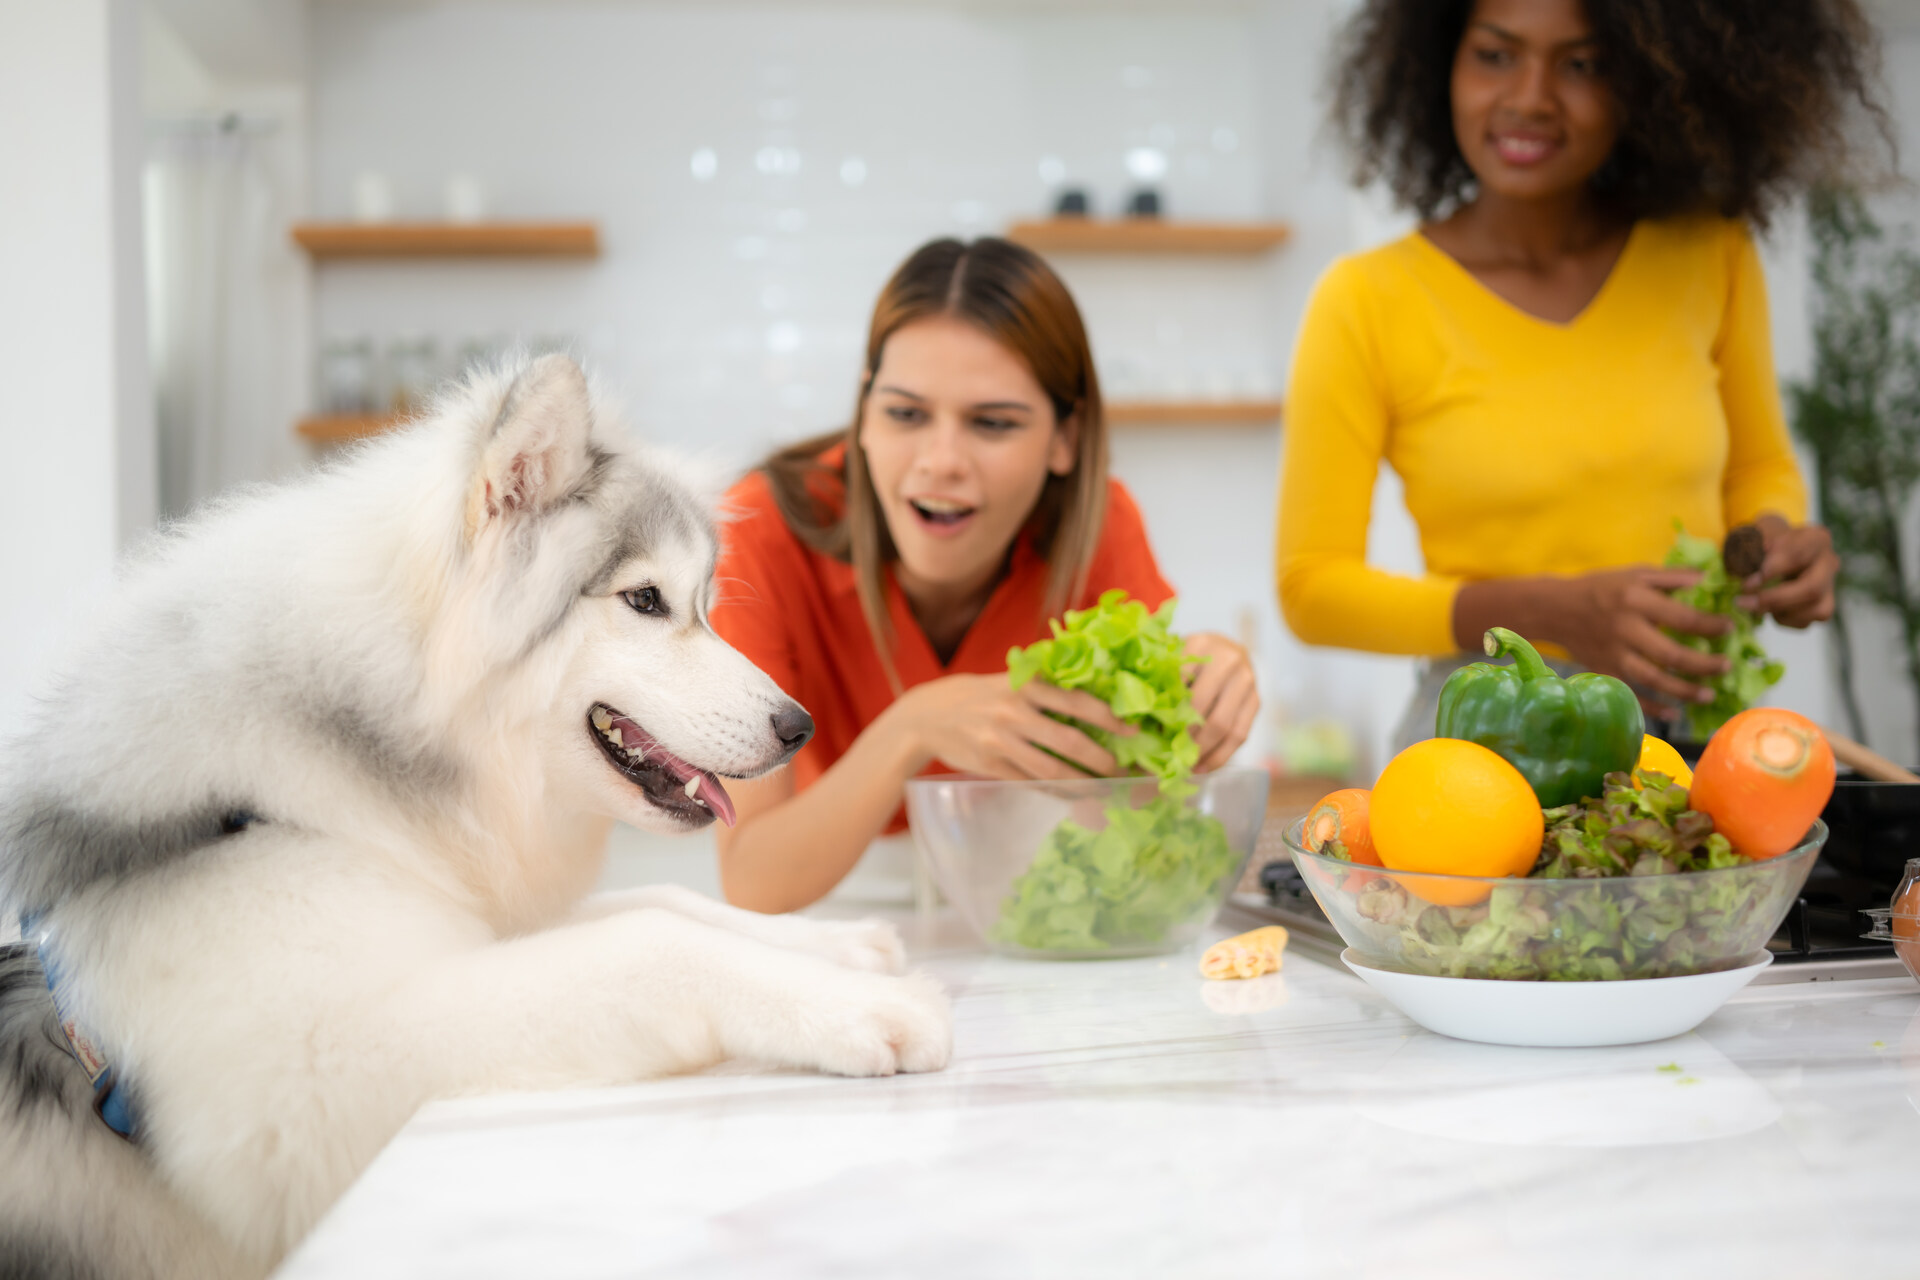 Two women preparing a salad in a kitchen along with a dog